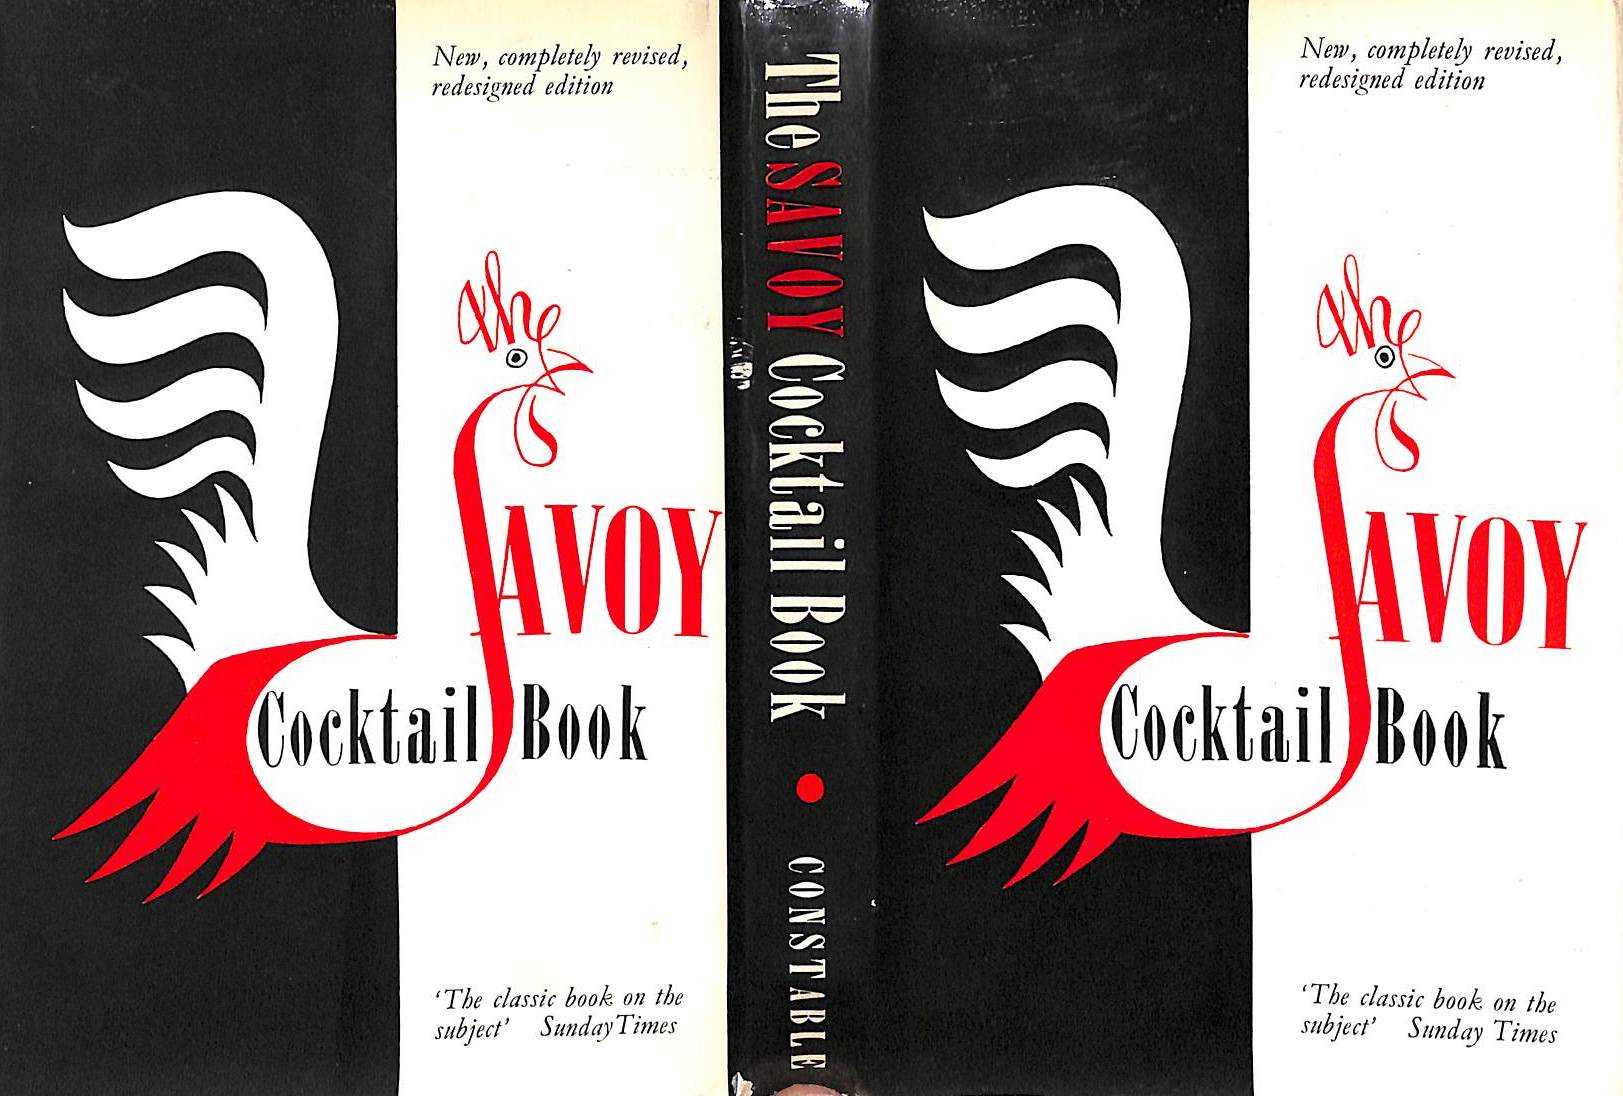 OP: The Savoy Cocktail Book – Kitchen Arts & Letters